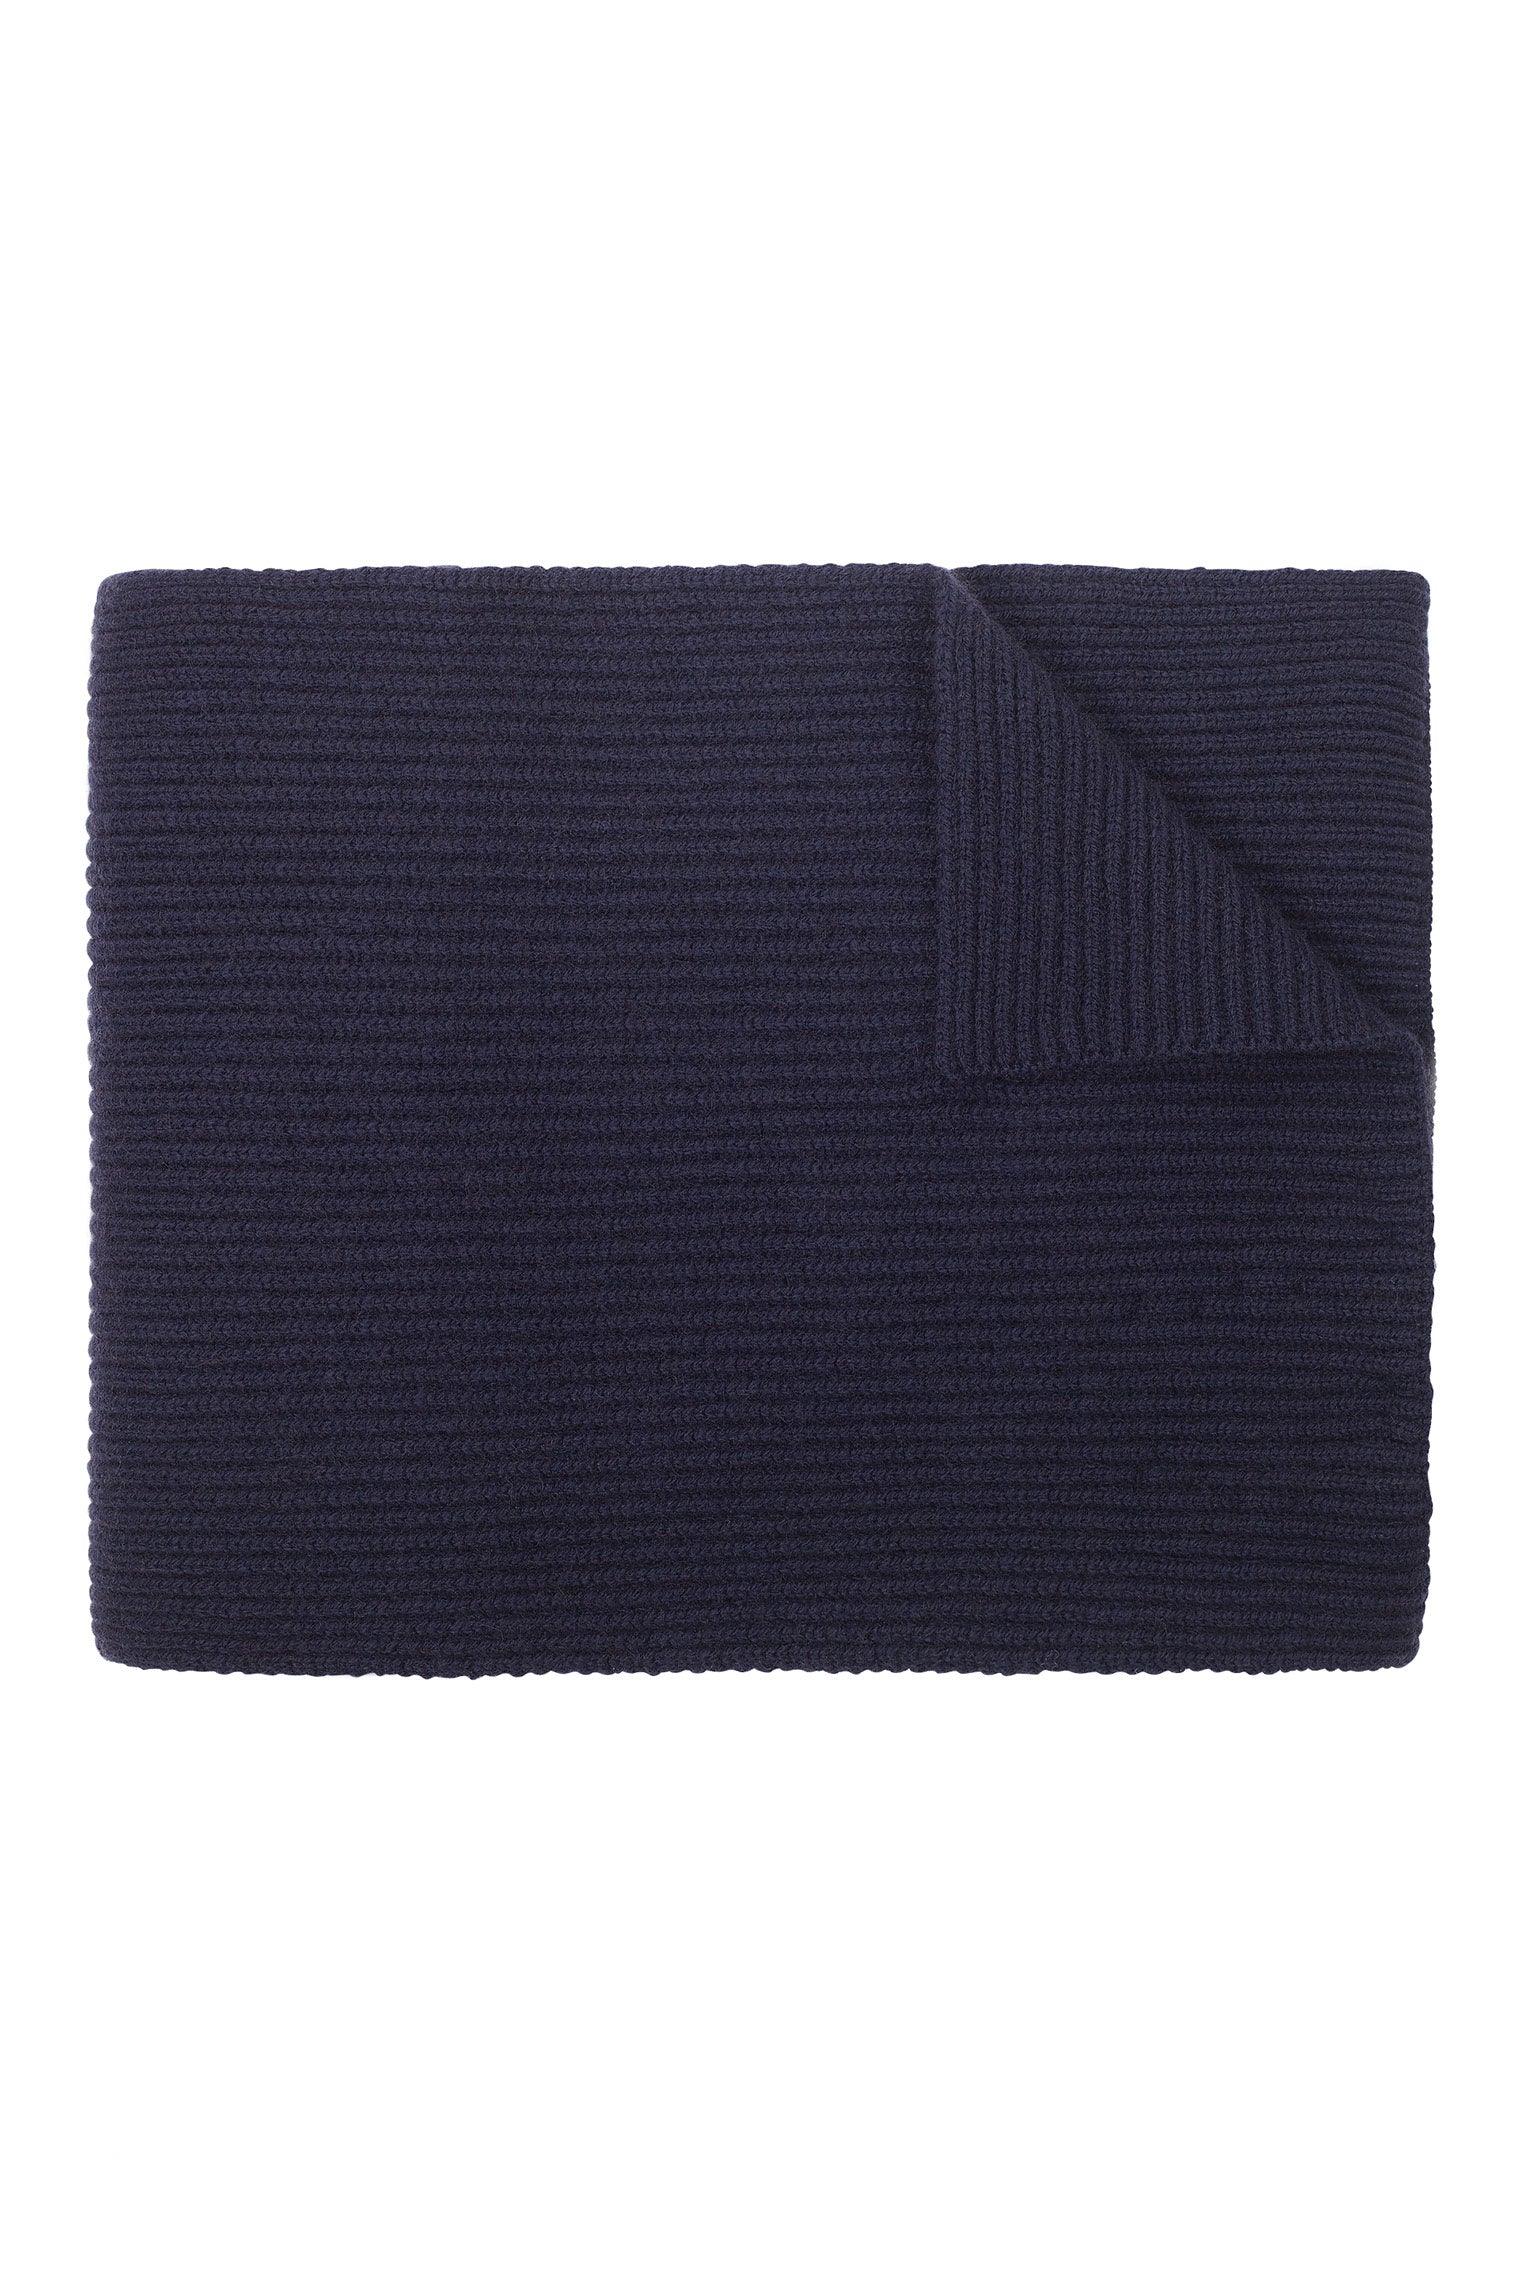 Cashmere Knitted Scarf - Valentines Day Gift Ideas - Lock & Co. Hatters London UK